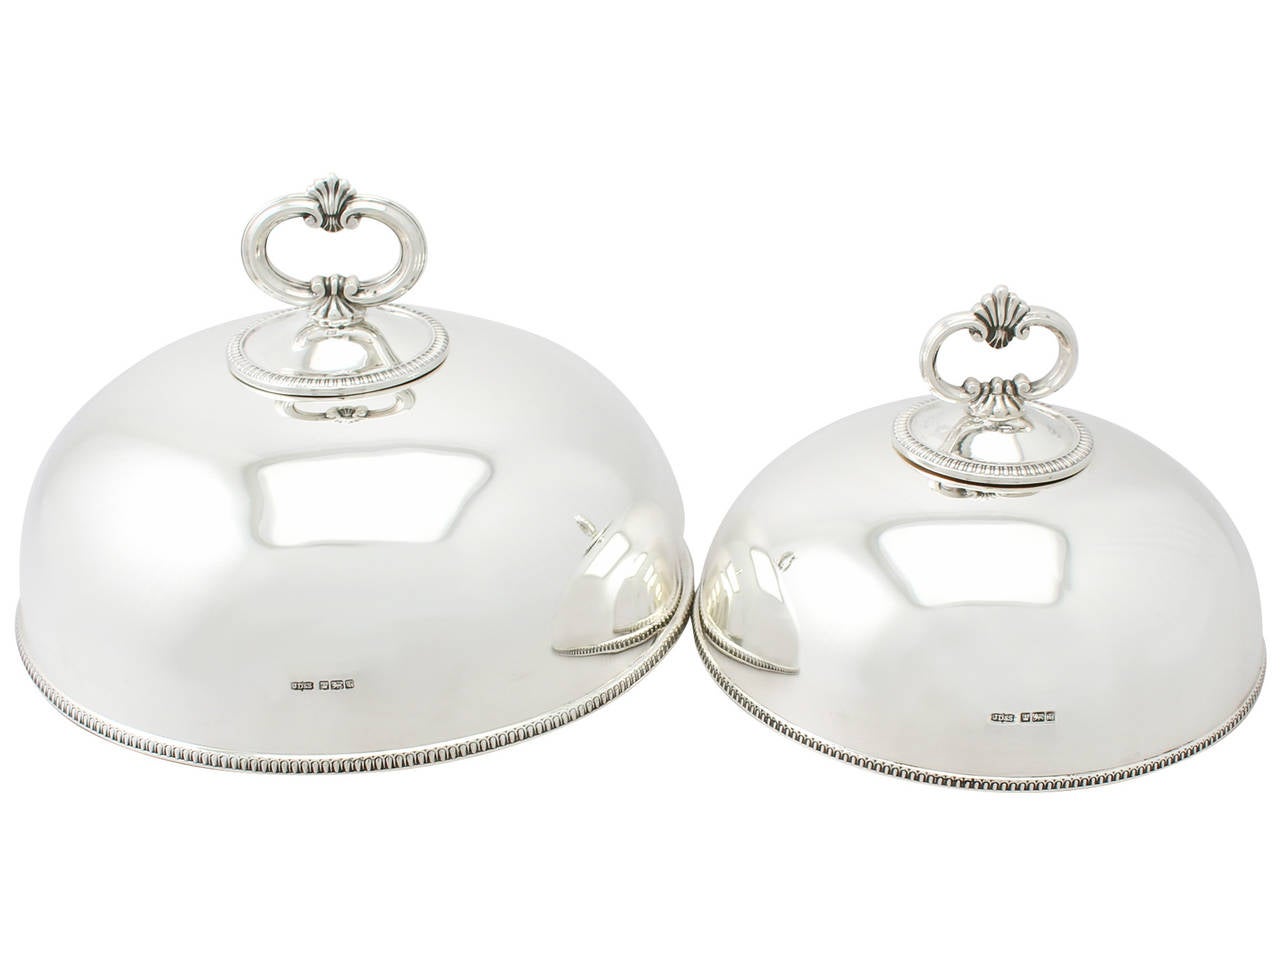 English Edwardian Sterling Silver Dish Covers, 1908